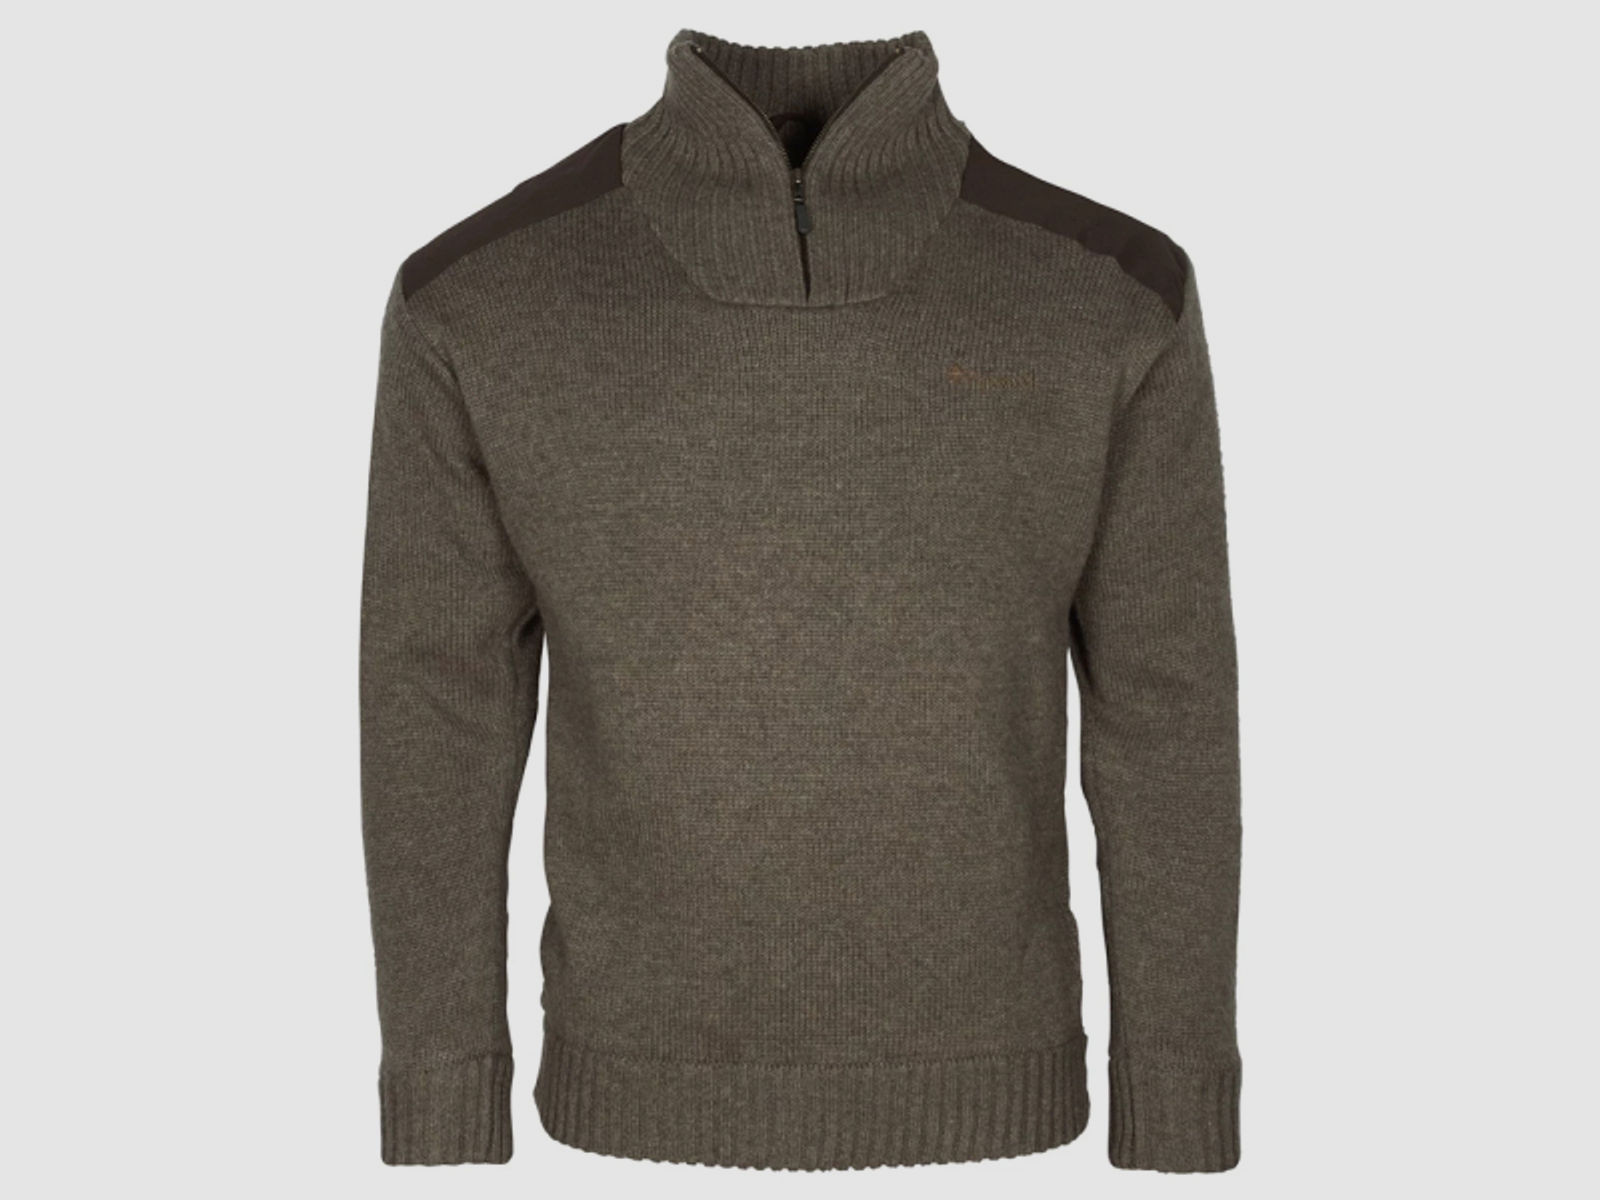 -40% PINEWOOD New Stormy SWEATER 9547 | Troyer Pulli Pullover winddicht & warm 50% Wolle > Größe L